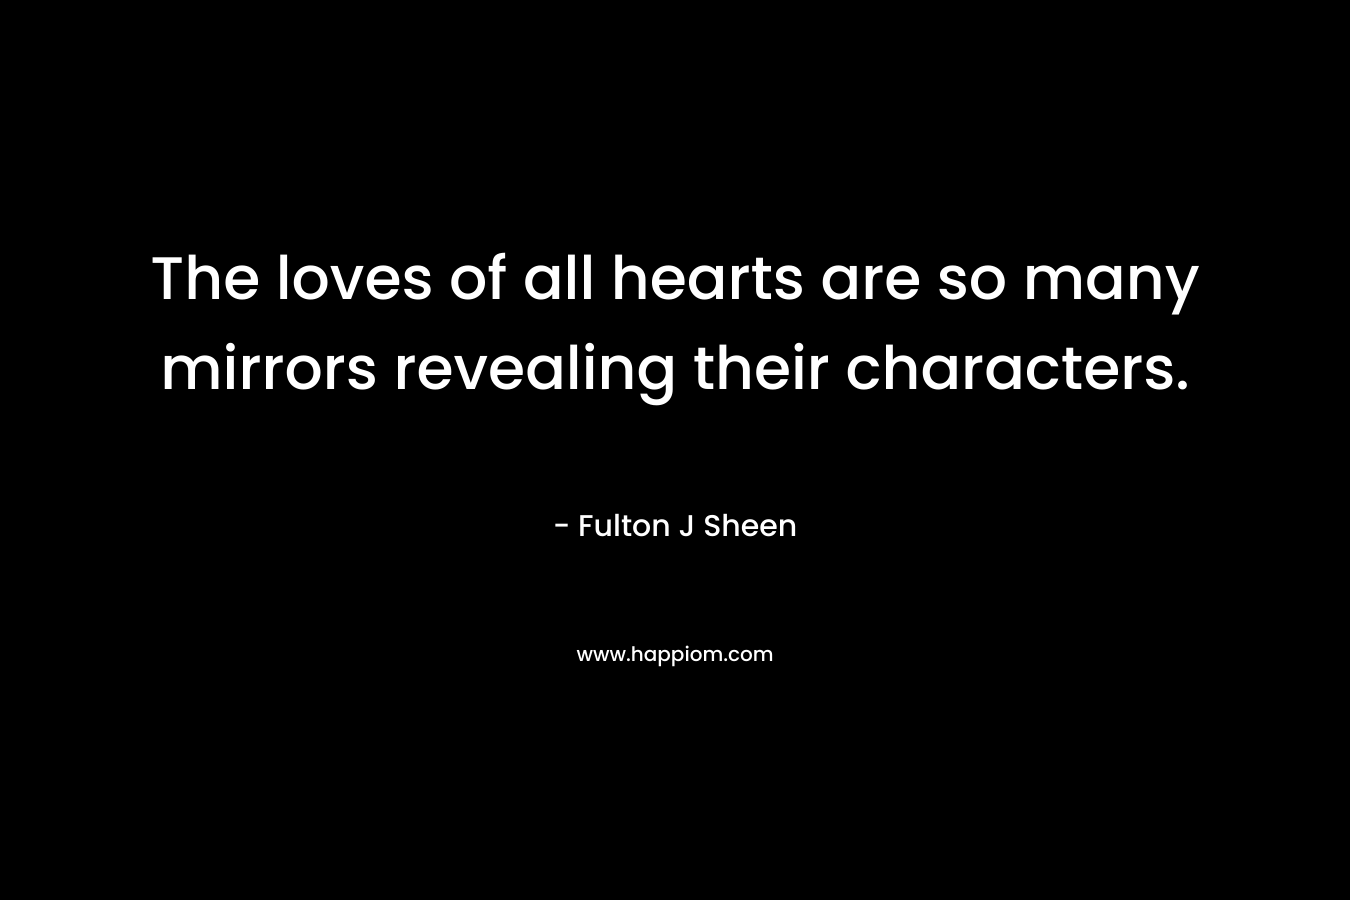 The loves of all hearts are so many mirrors revealing their characters. – Fulton J Sheen